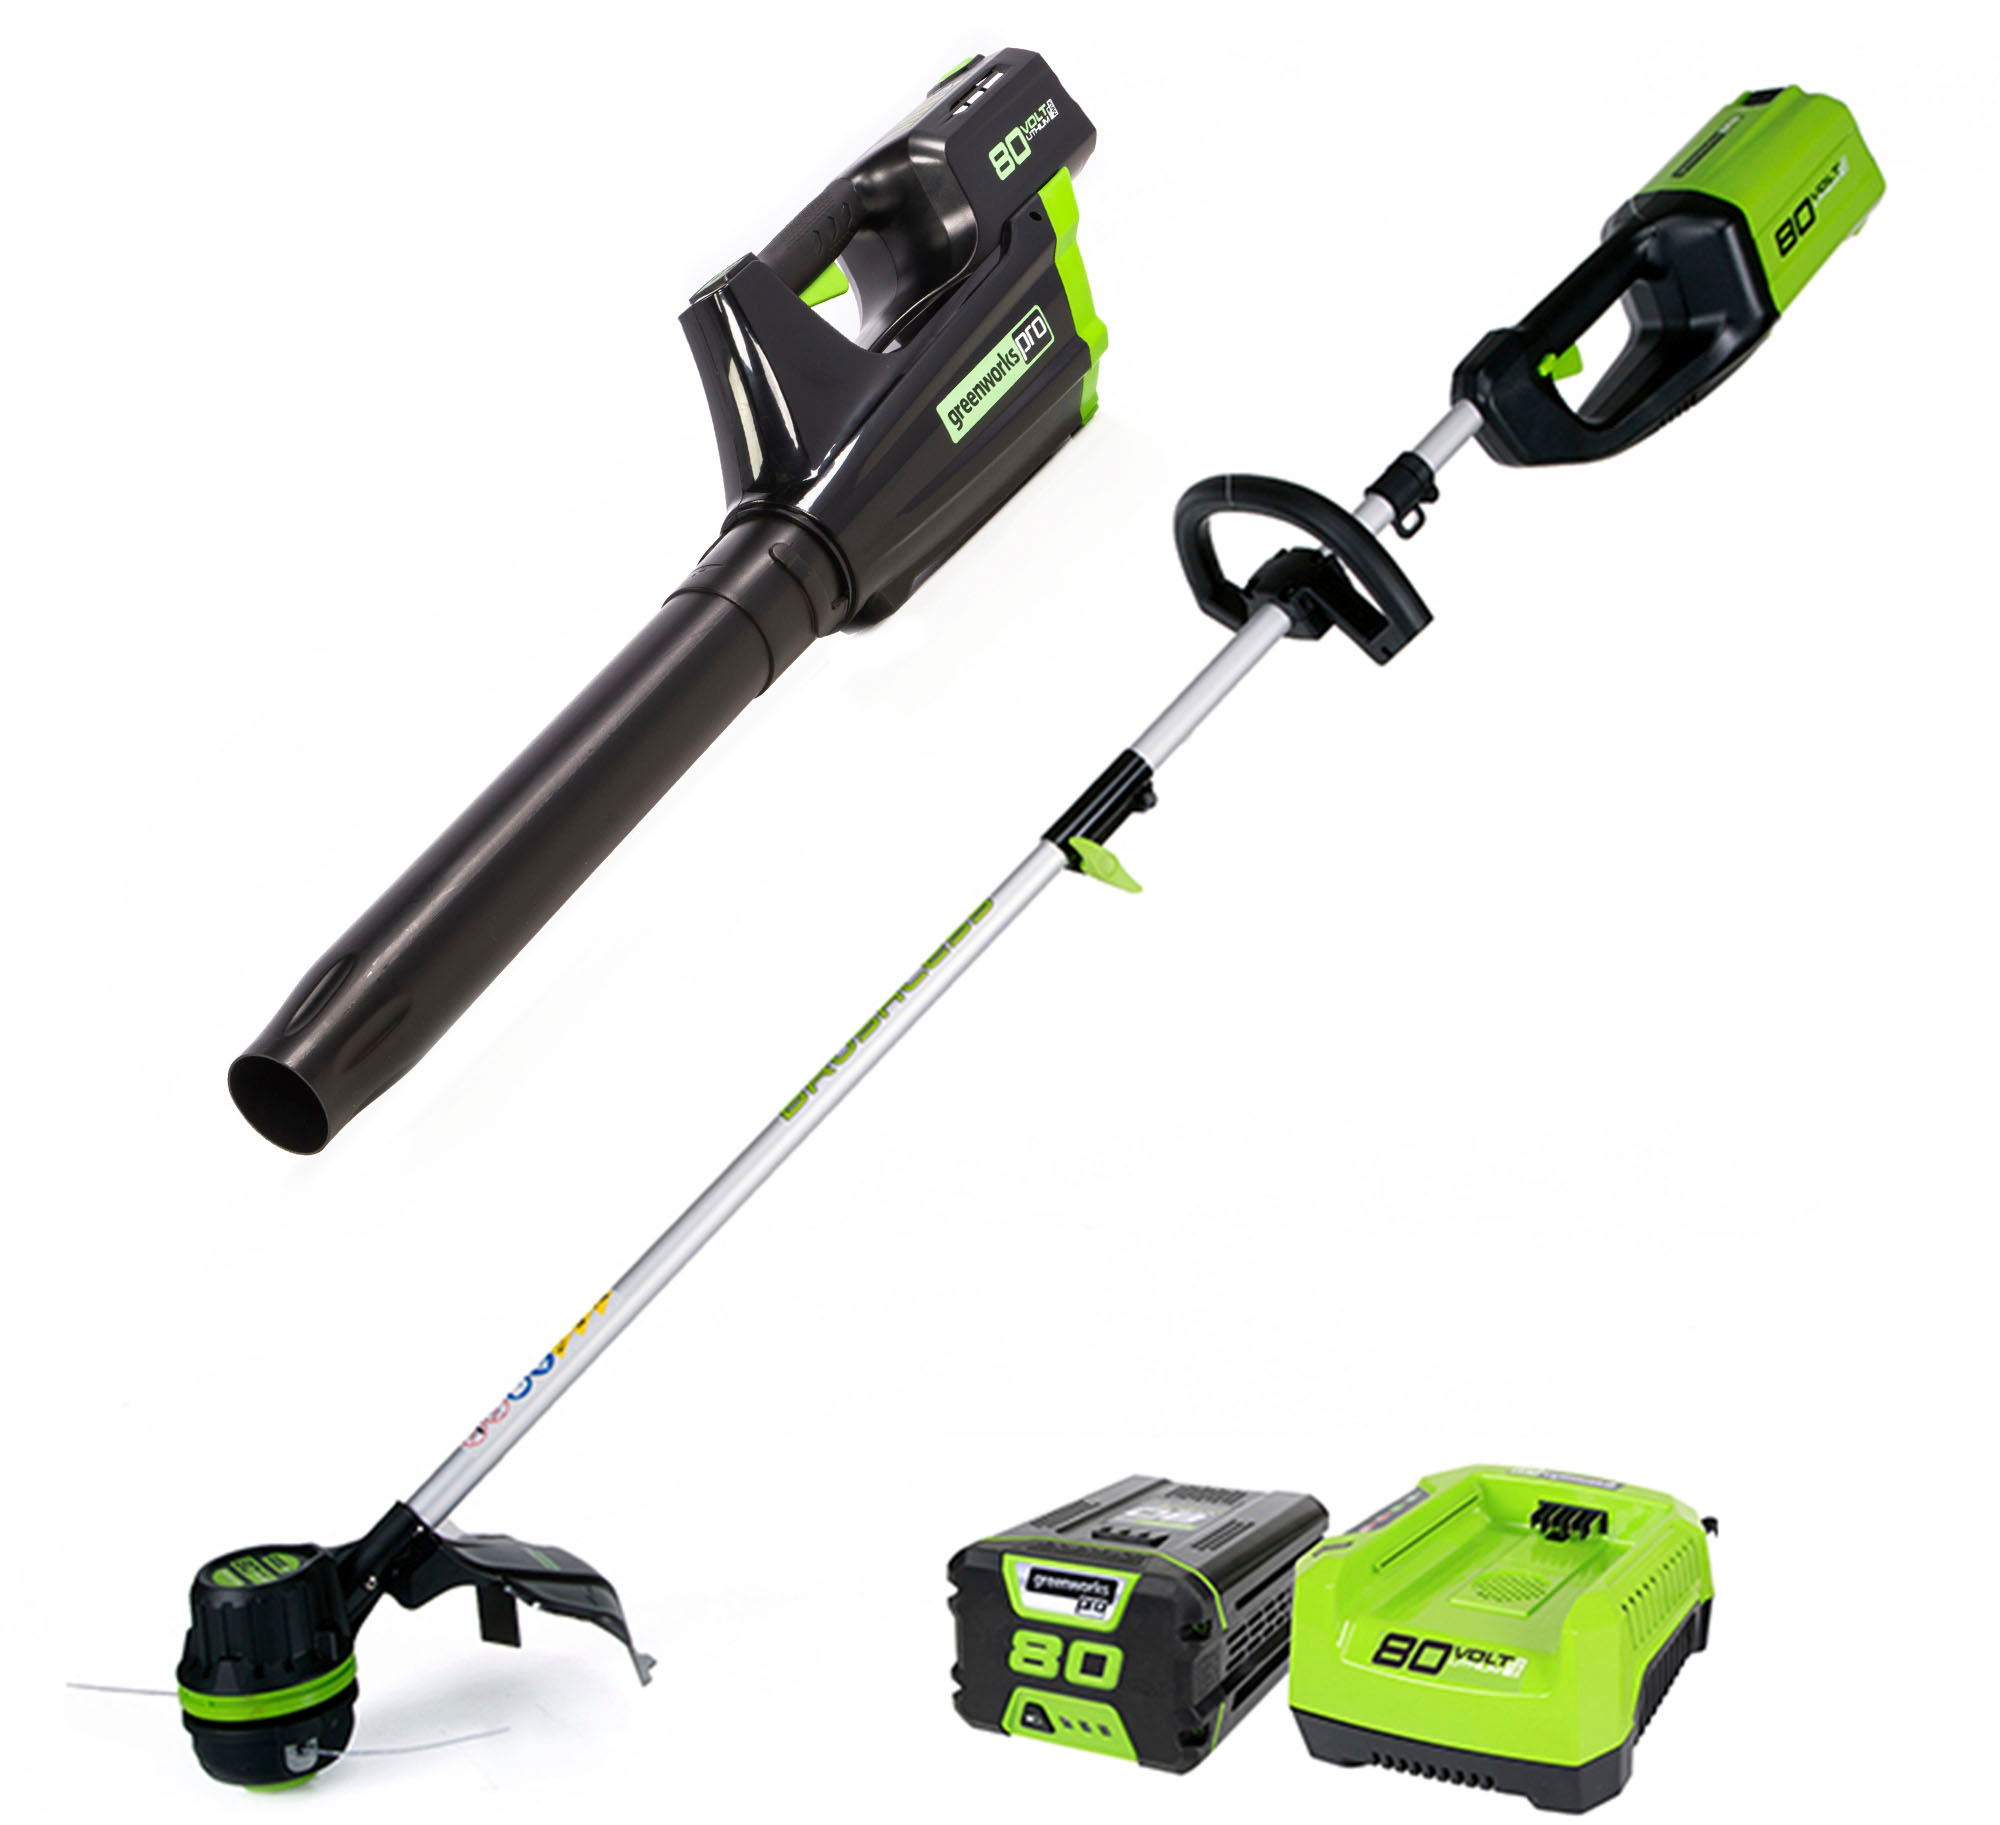 holdall Poesi vand Greenworks 80-Volt Cordless 16" String Trimer and 125 MPH 500CFM Blower  Combo Kit (2.0Ah Battery and Charger Included) Green 1301402 - Best Buy